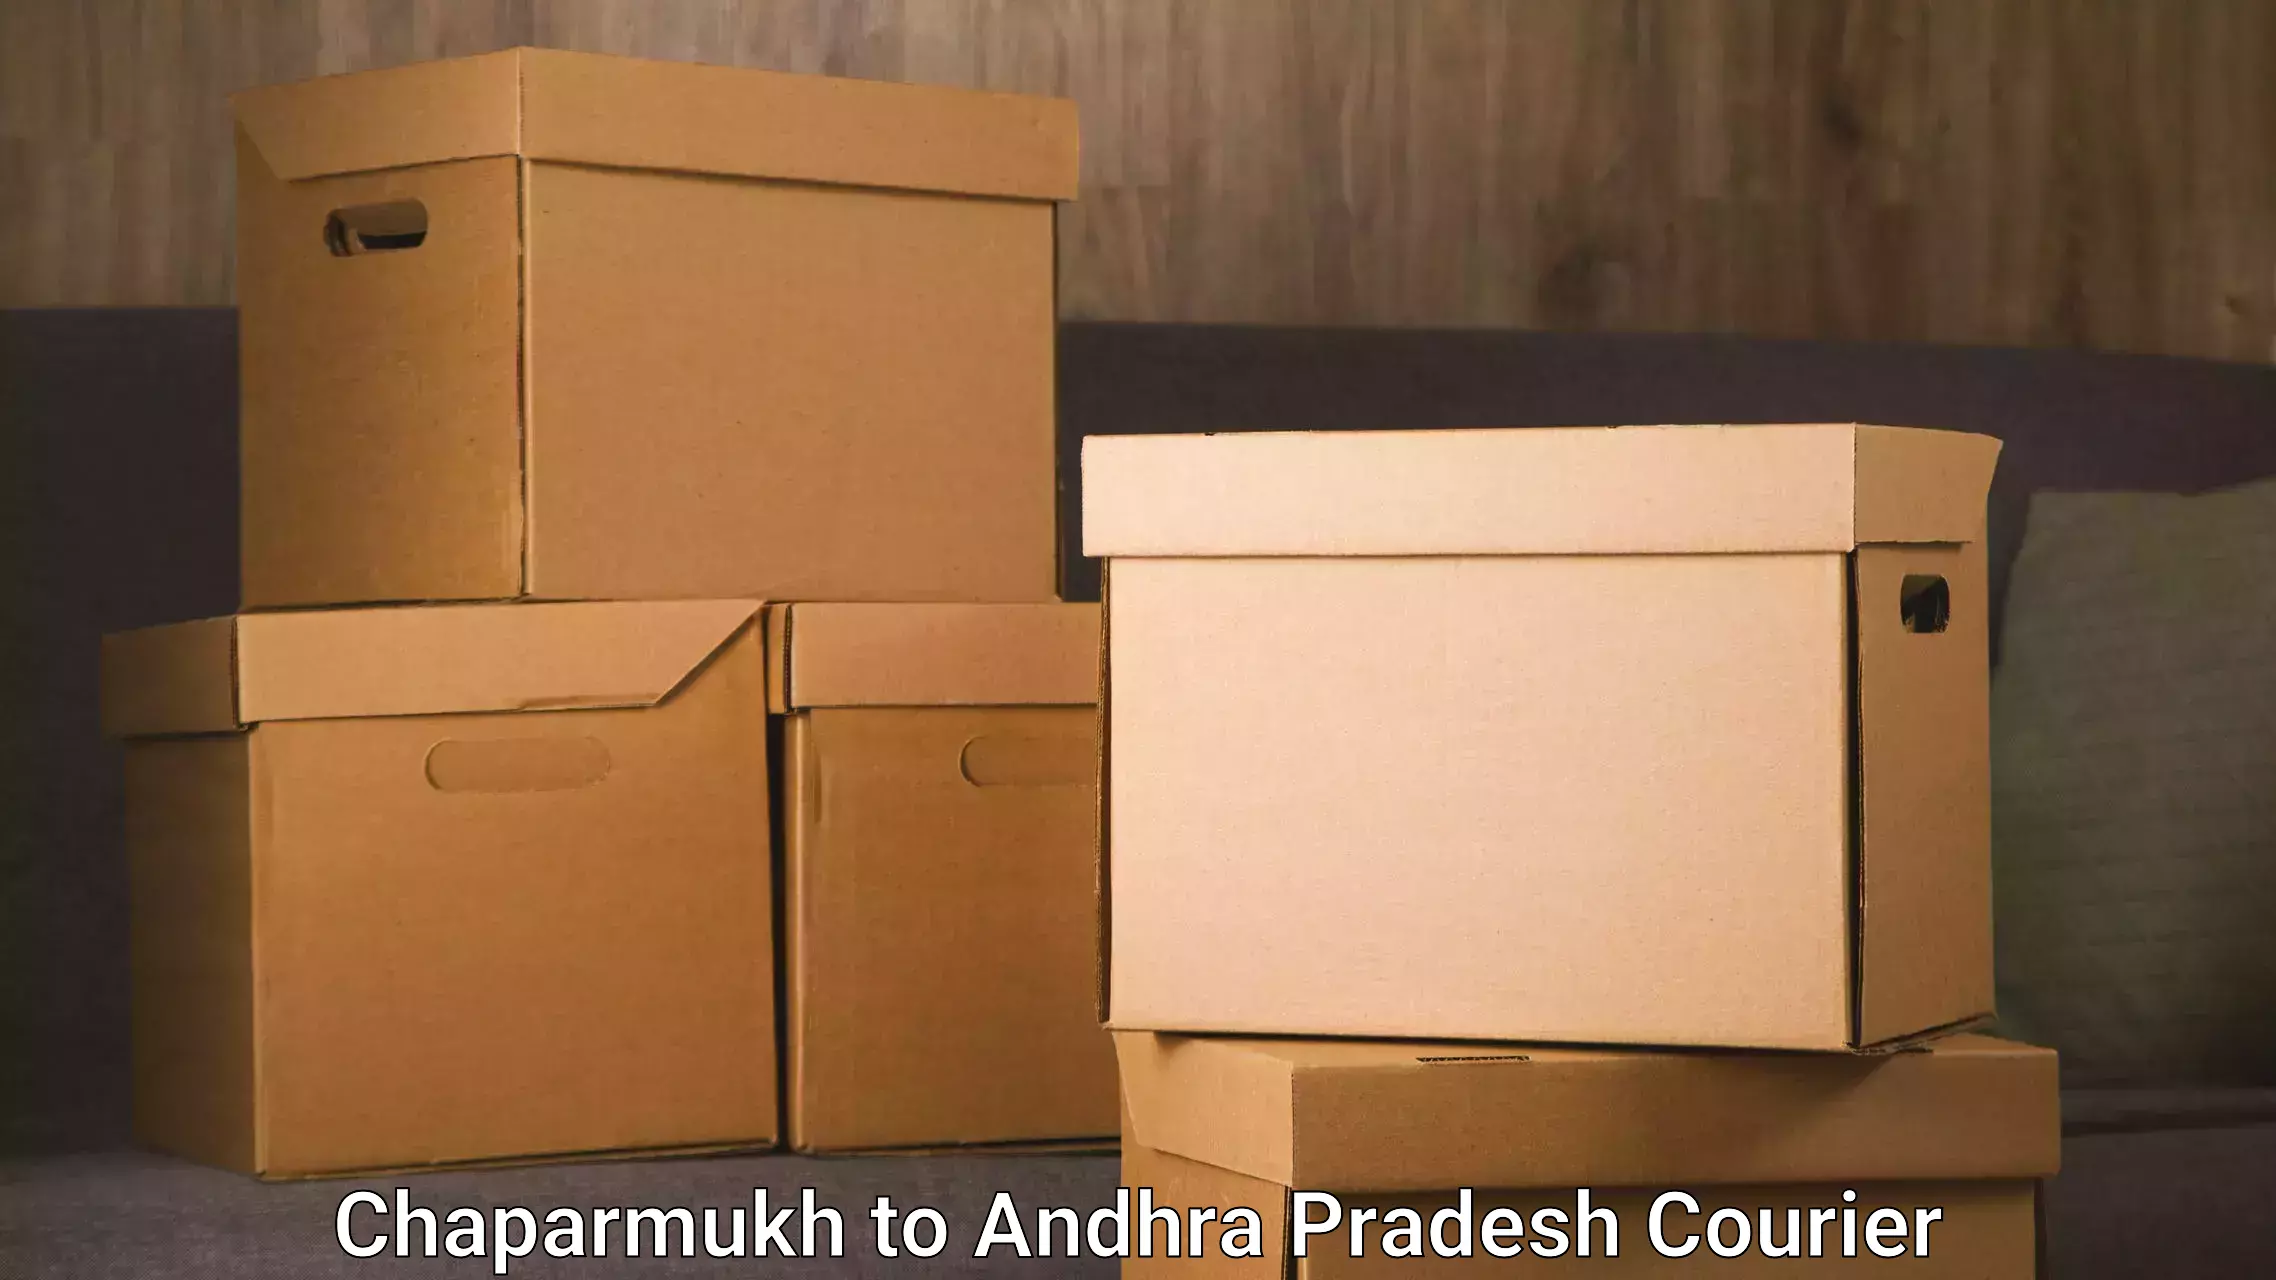 Courier service efficiency Chaparmukh to Andhra Pradesh